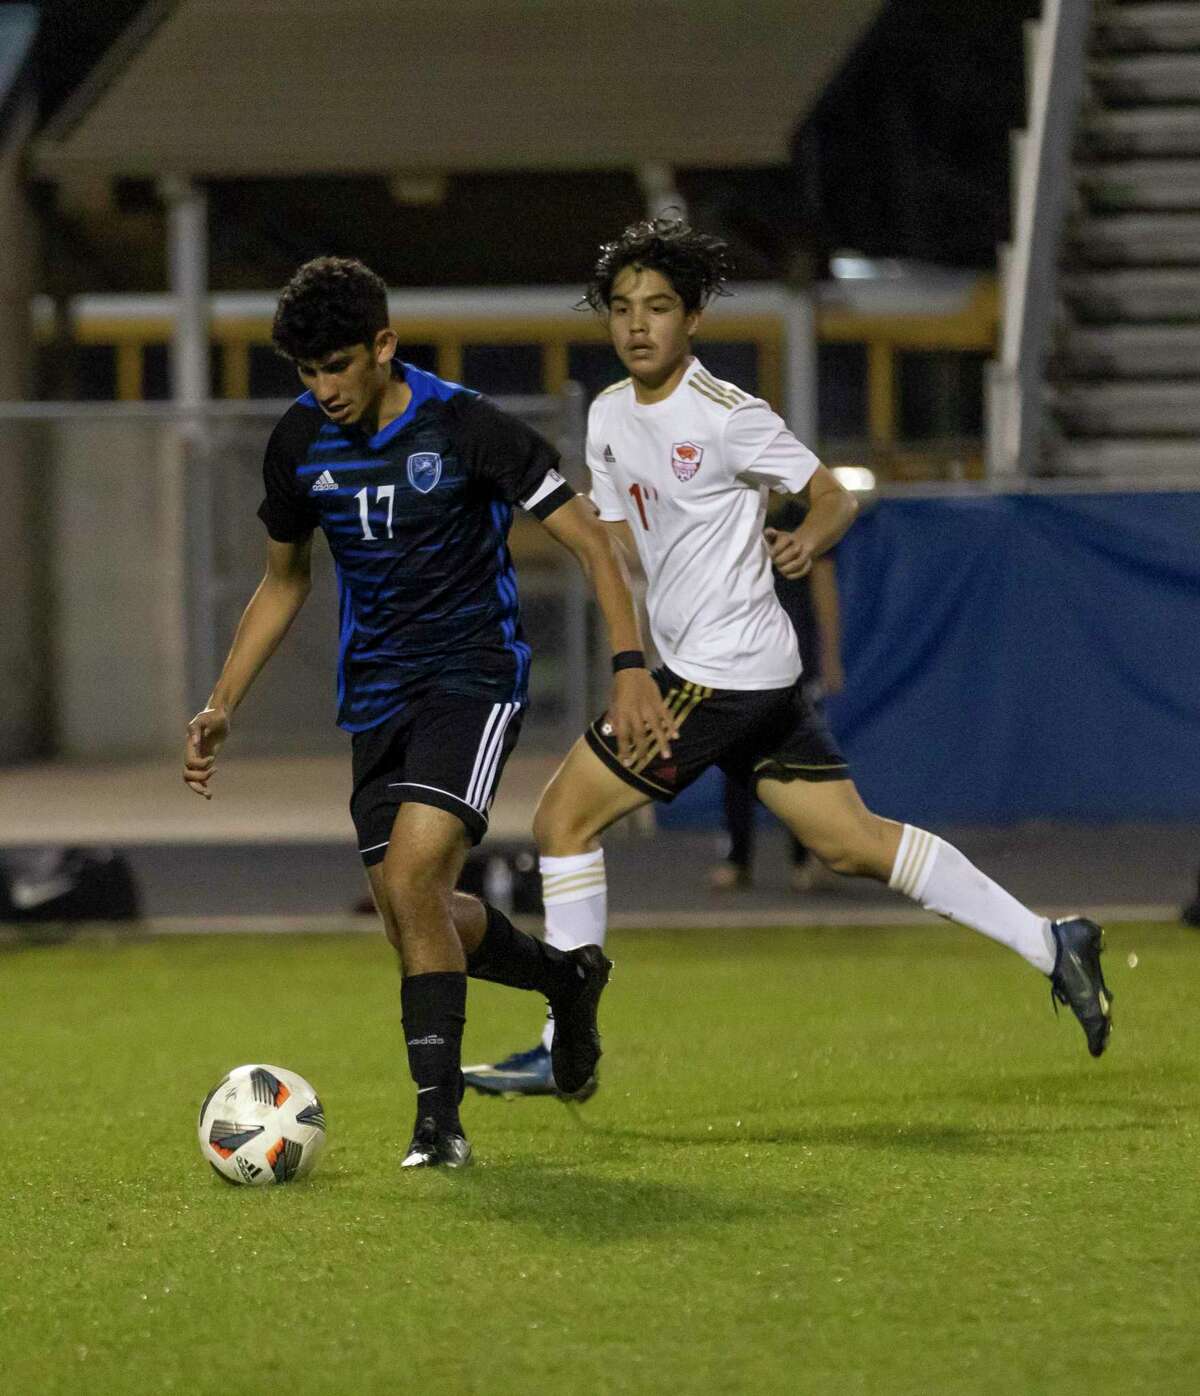 New Caney’s Miguel Rodriguez (17), shown here last season, scored twice for the Eagles in a win over Montgomery Saturday afternoon.